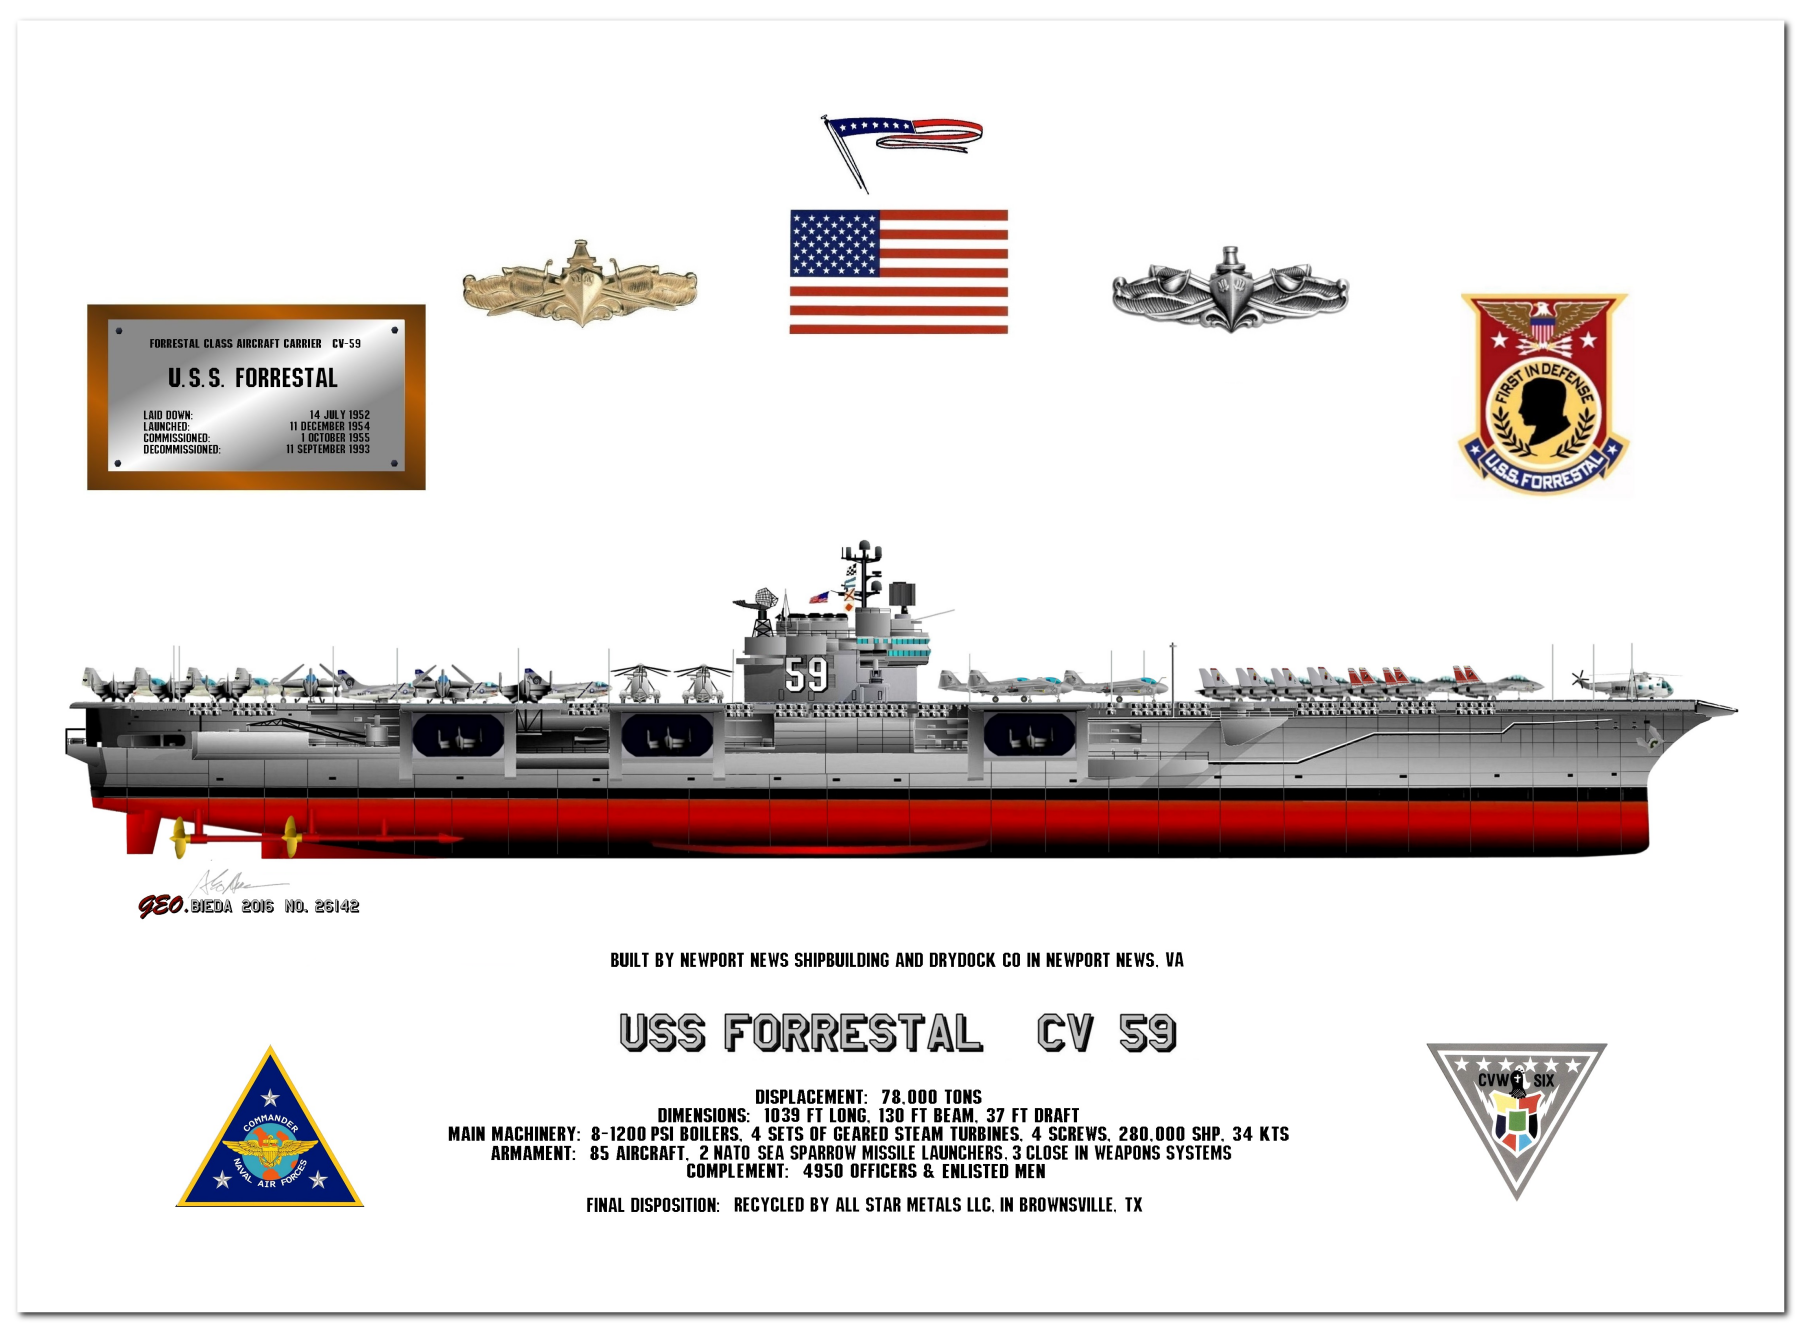 Forrestal Class Aircraft Carrier Profile Drawings by George Bieda